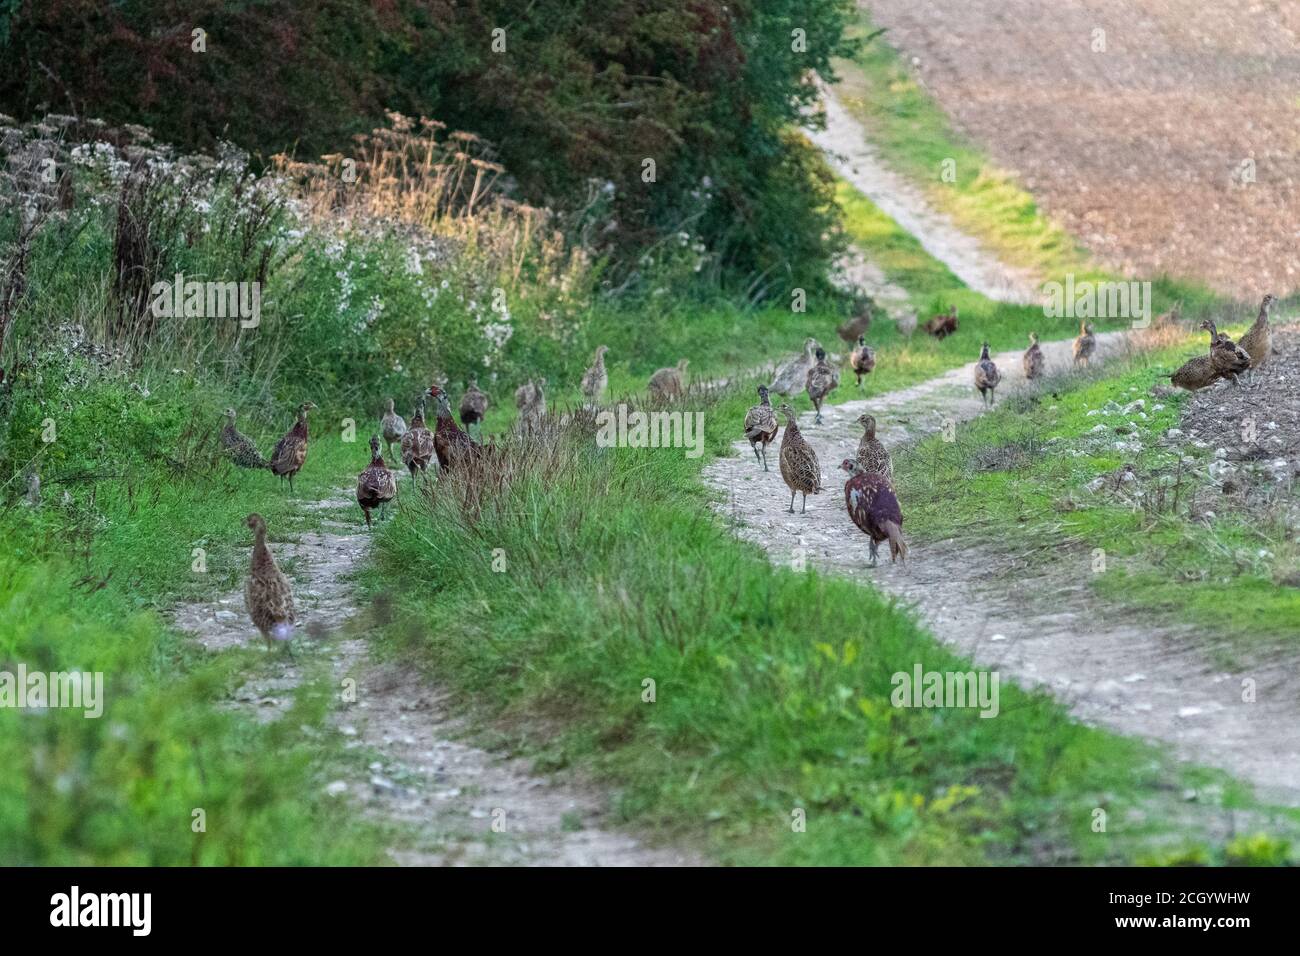 Many grouse on the edge of a field in September, UK Stock Photo